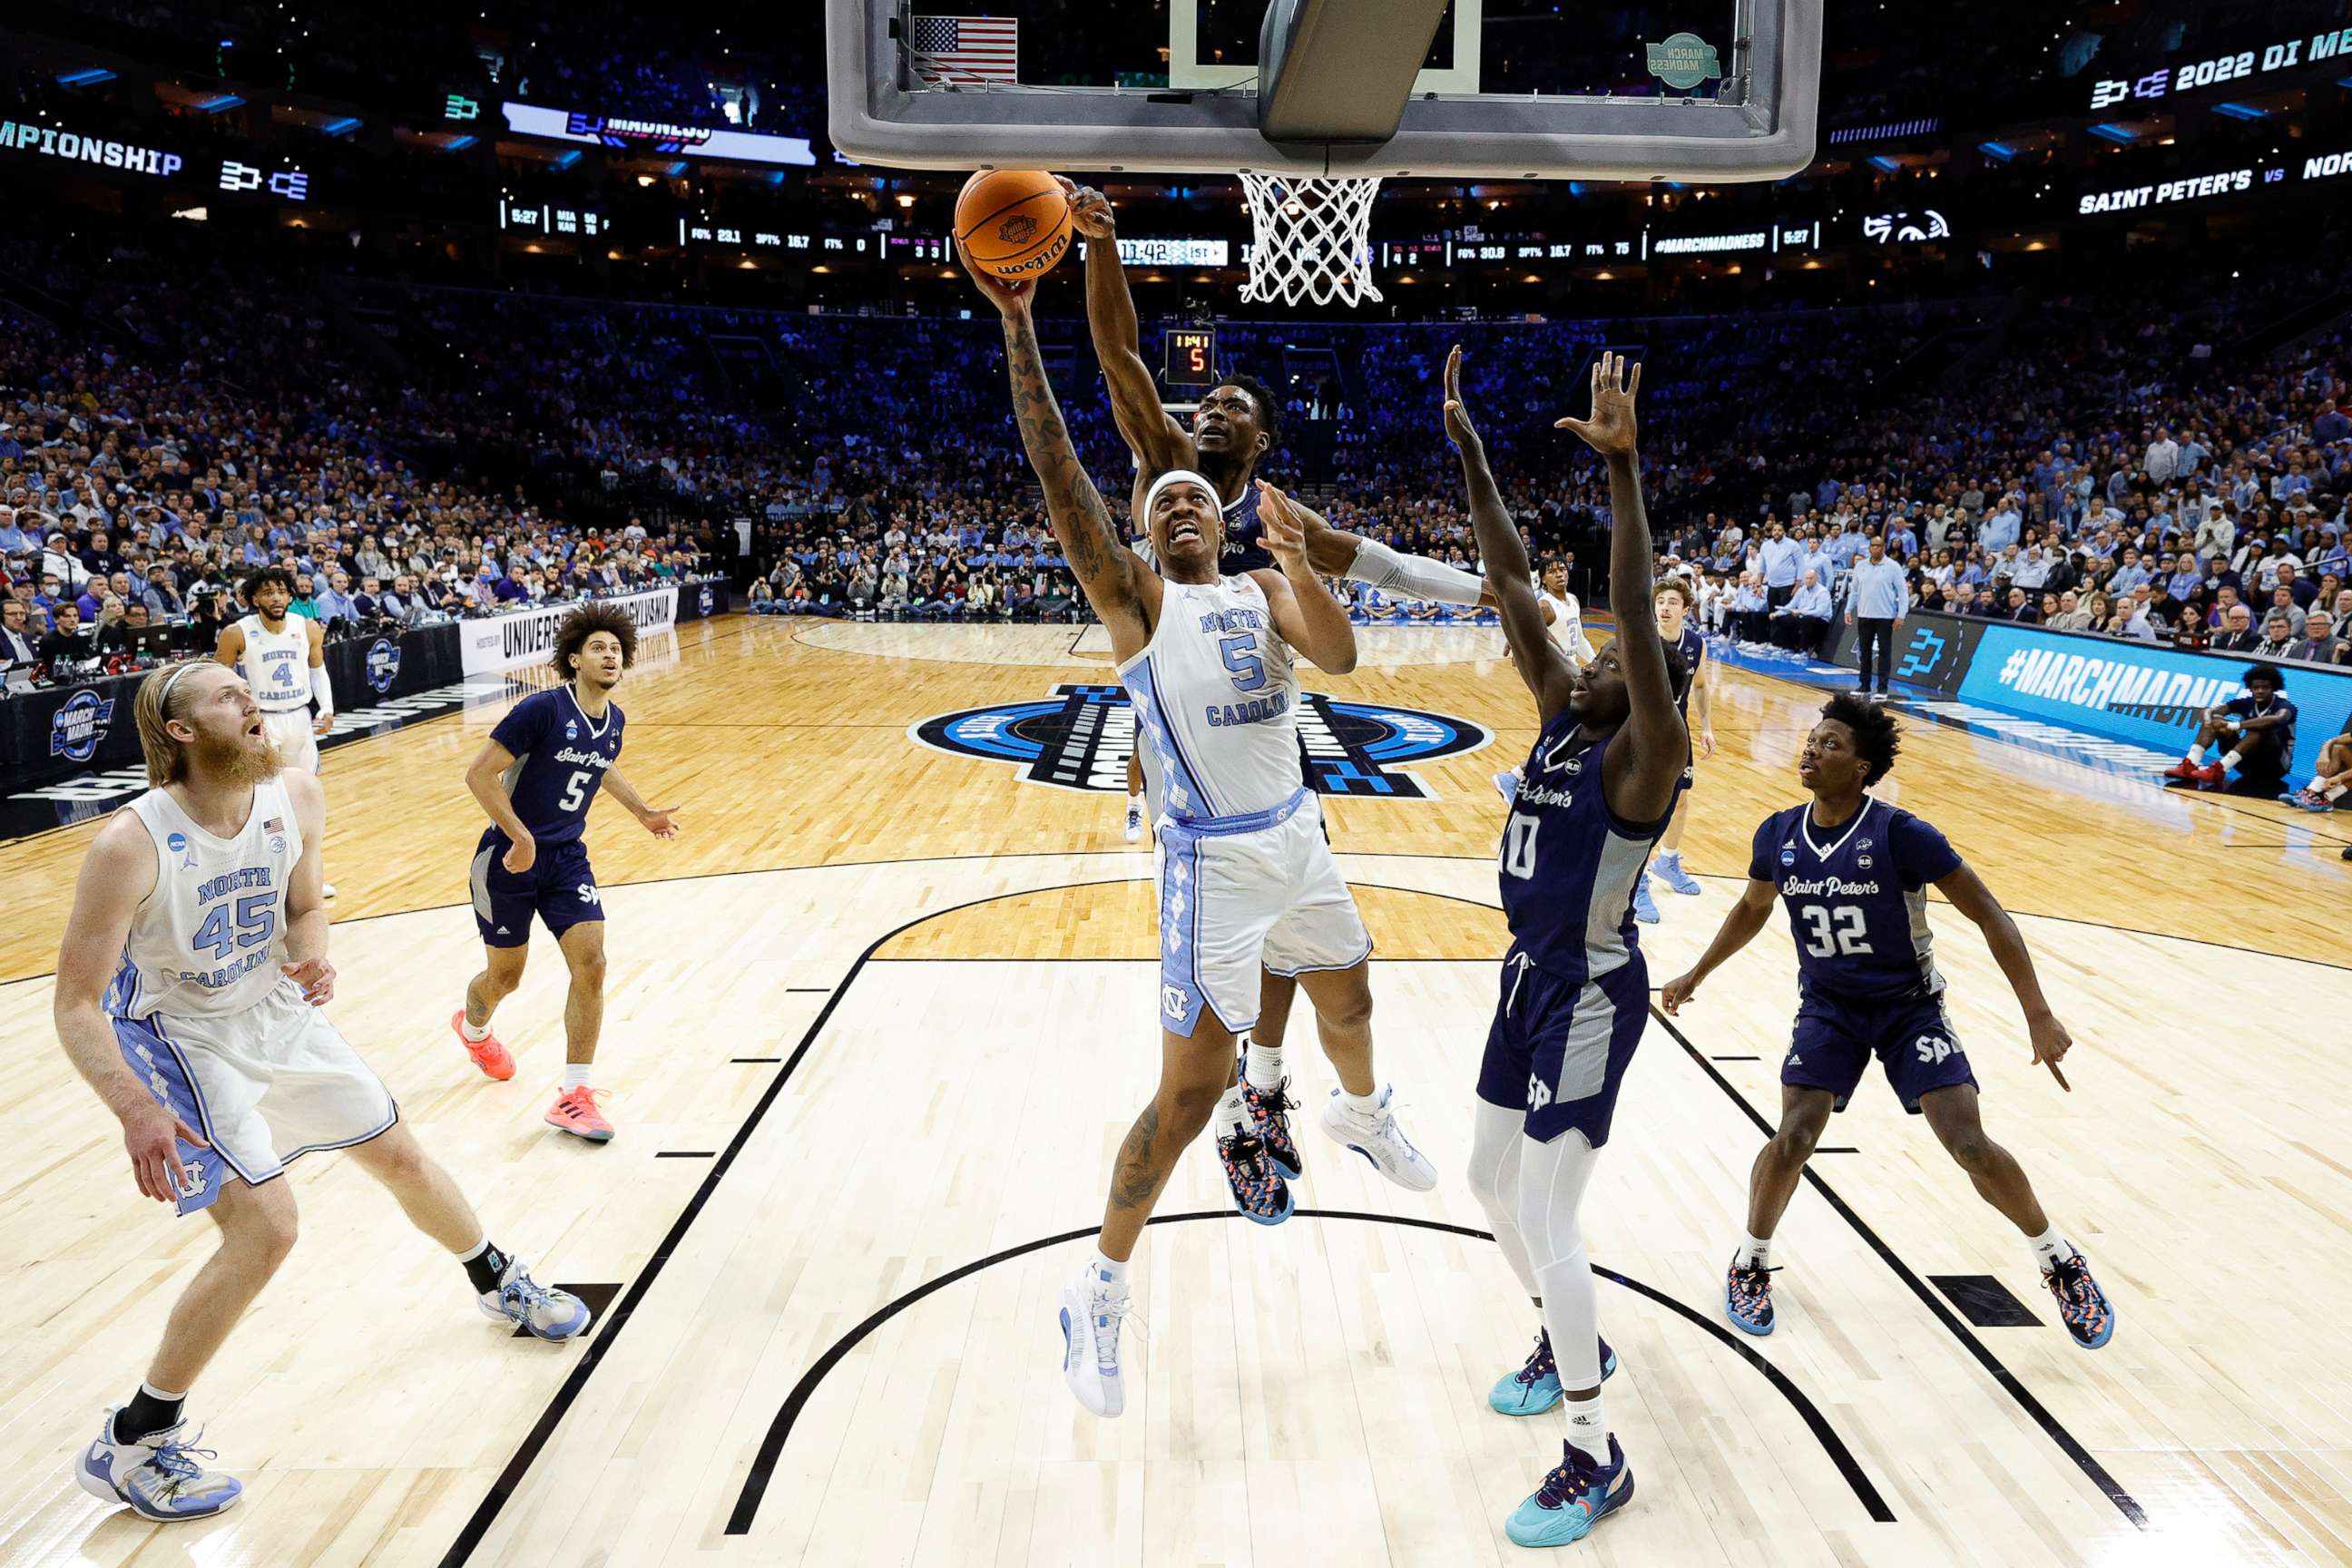 PHOTO: Armando Bacot #5 of the North Carolina Tar Heels takes a shot in the Elite Eight round game of the 2022 NCAA Men's Basketball Tournament at Wells Fargo Center on March 27, 2022, in Philadelphia, Penn.